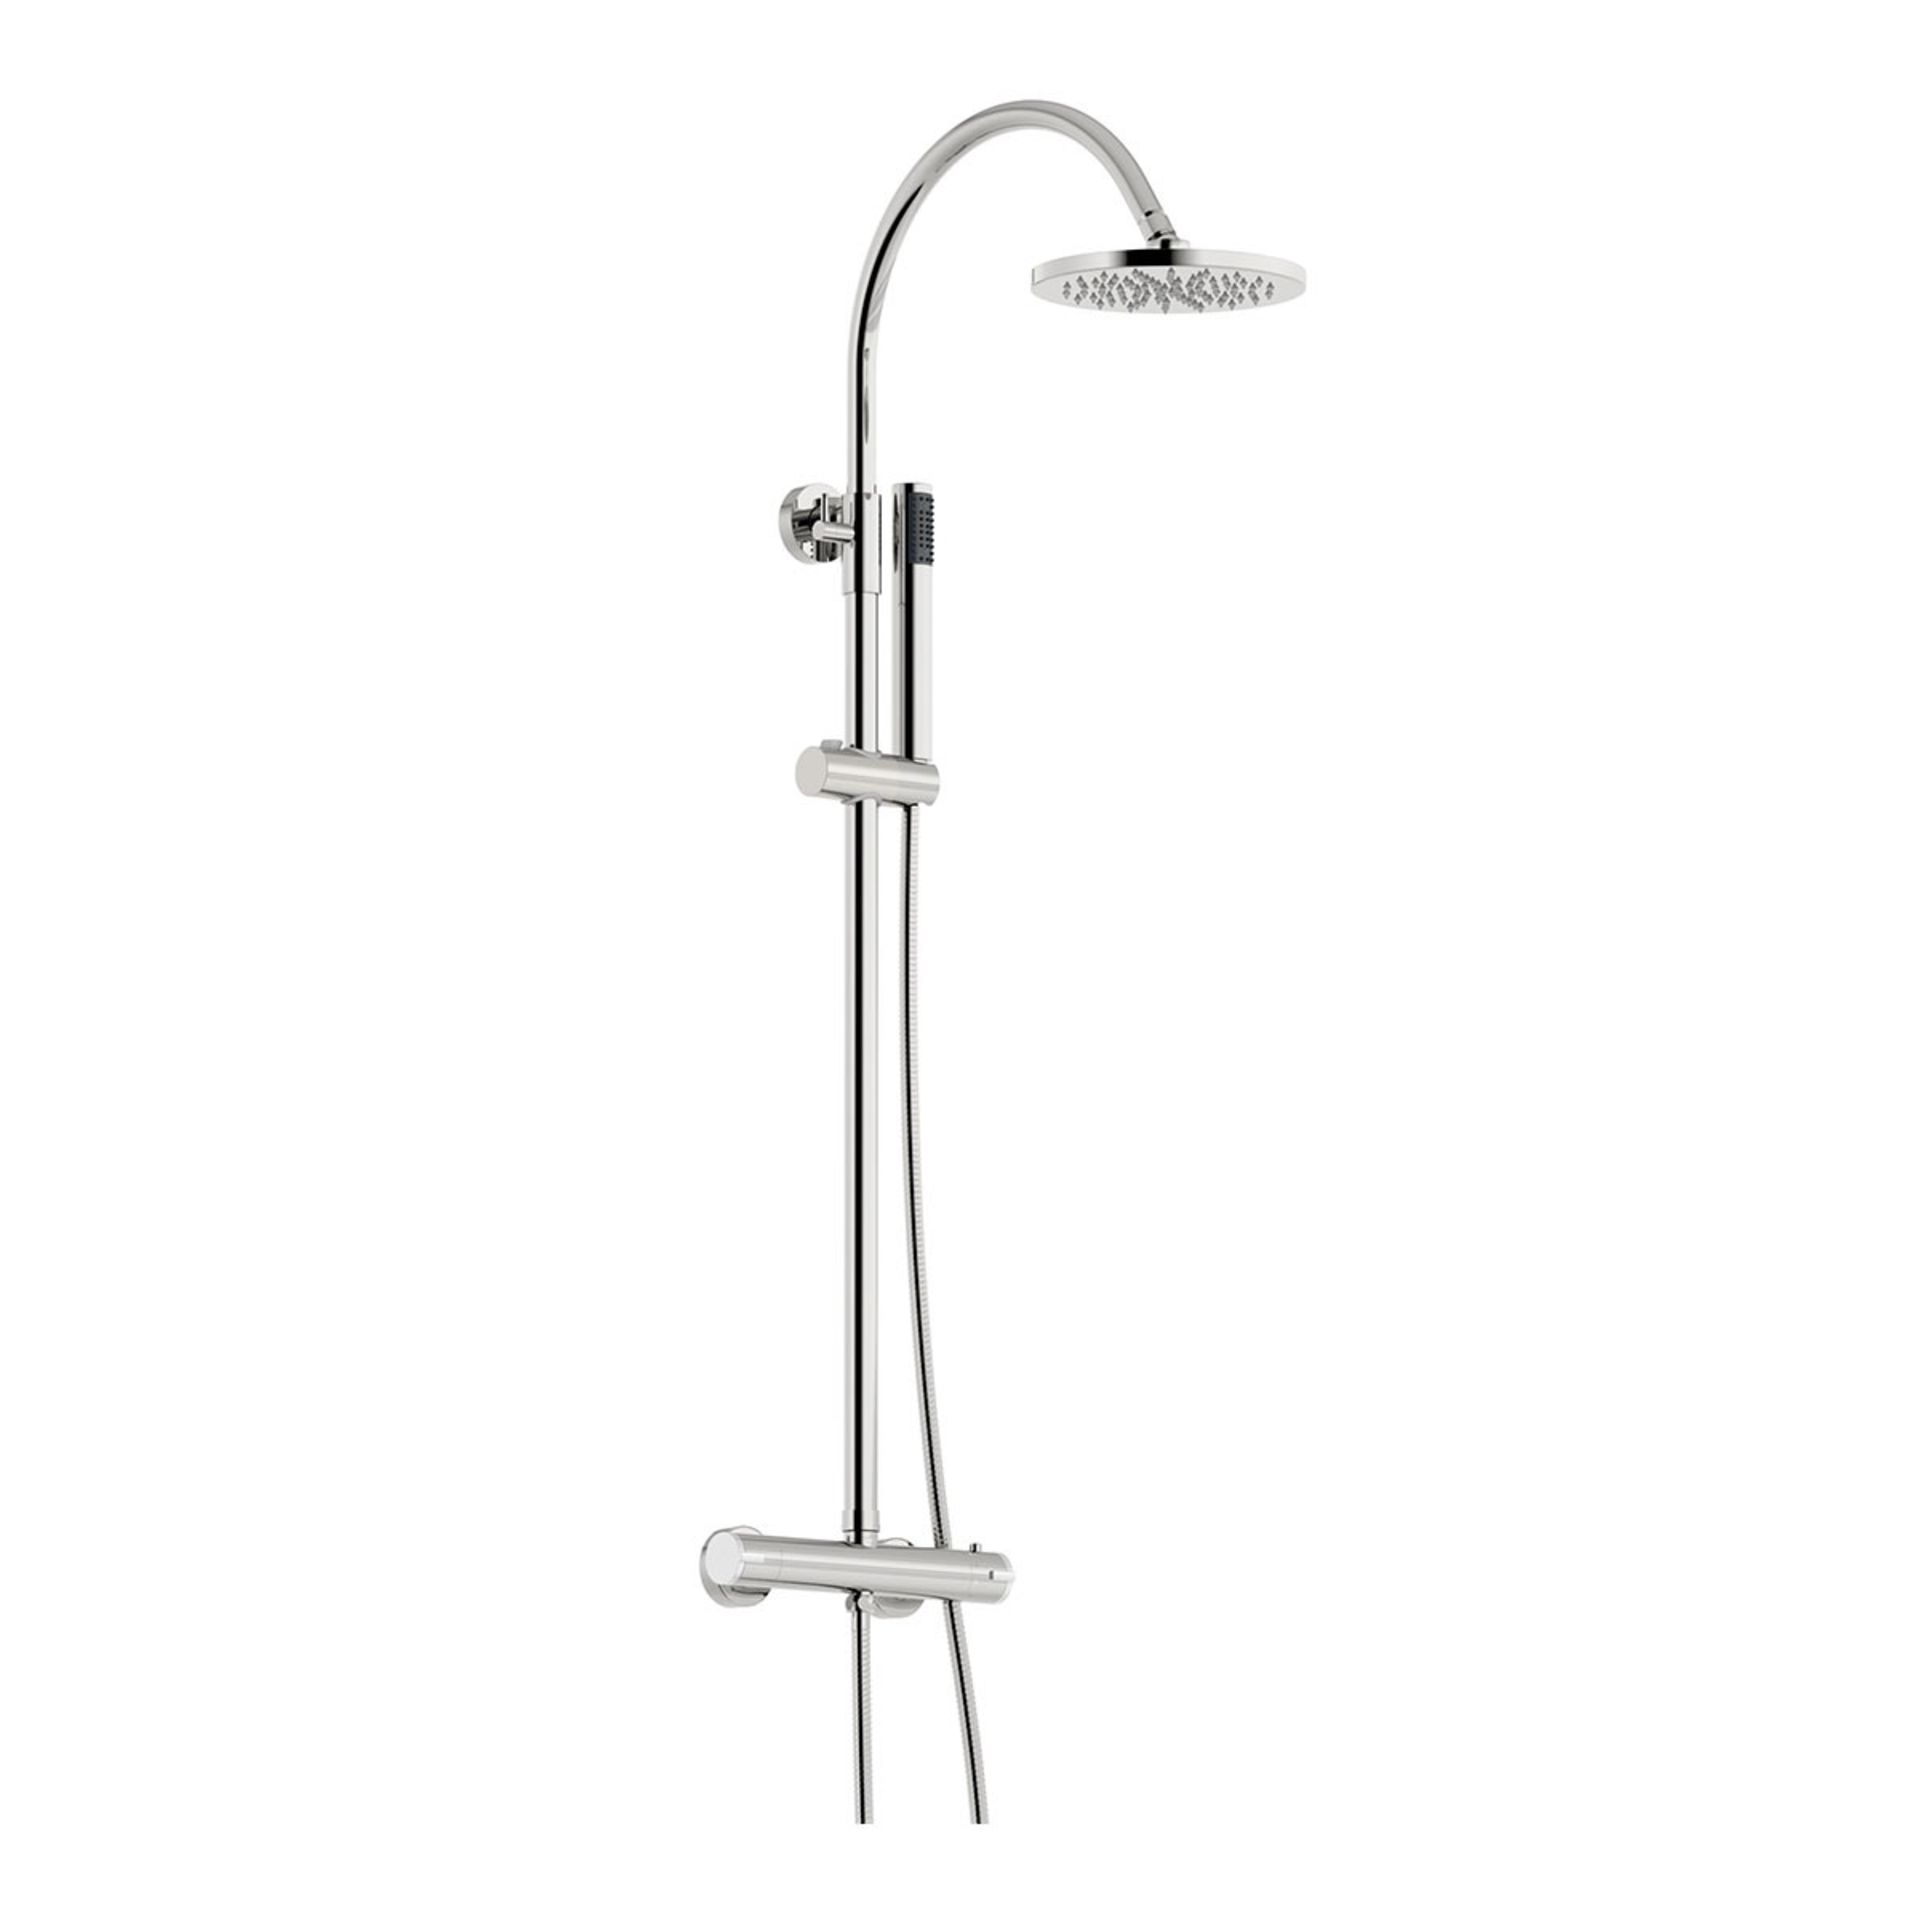 1 x Aria Round Head Thermostatic Riser Shower System - Unused Stock - Contemporary Shower System - Image 9 of 9